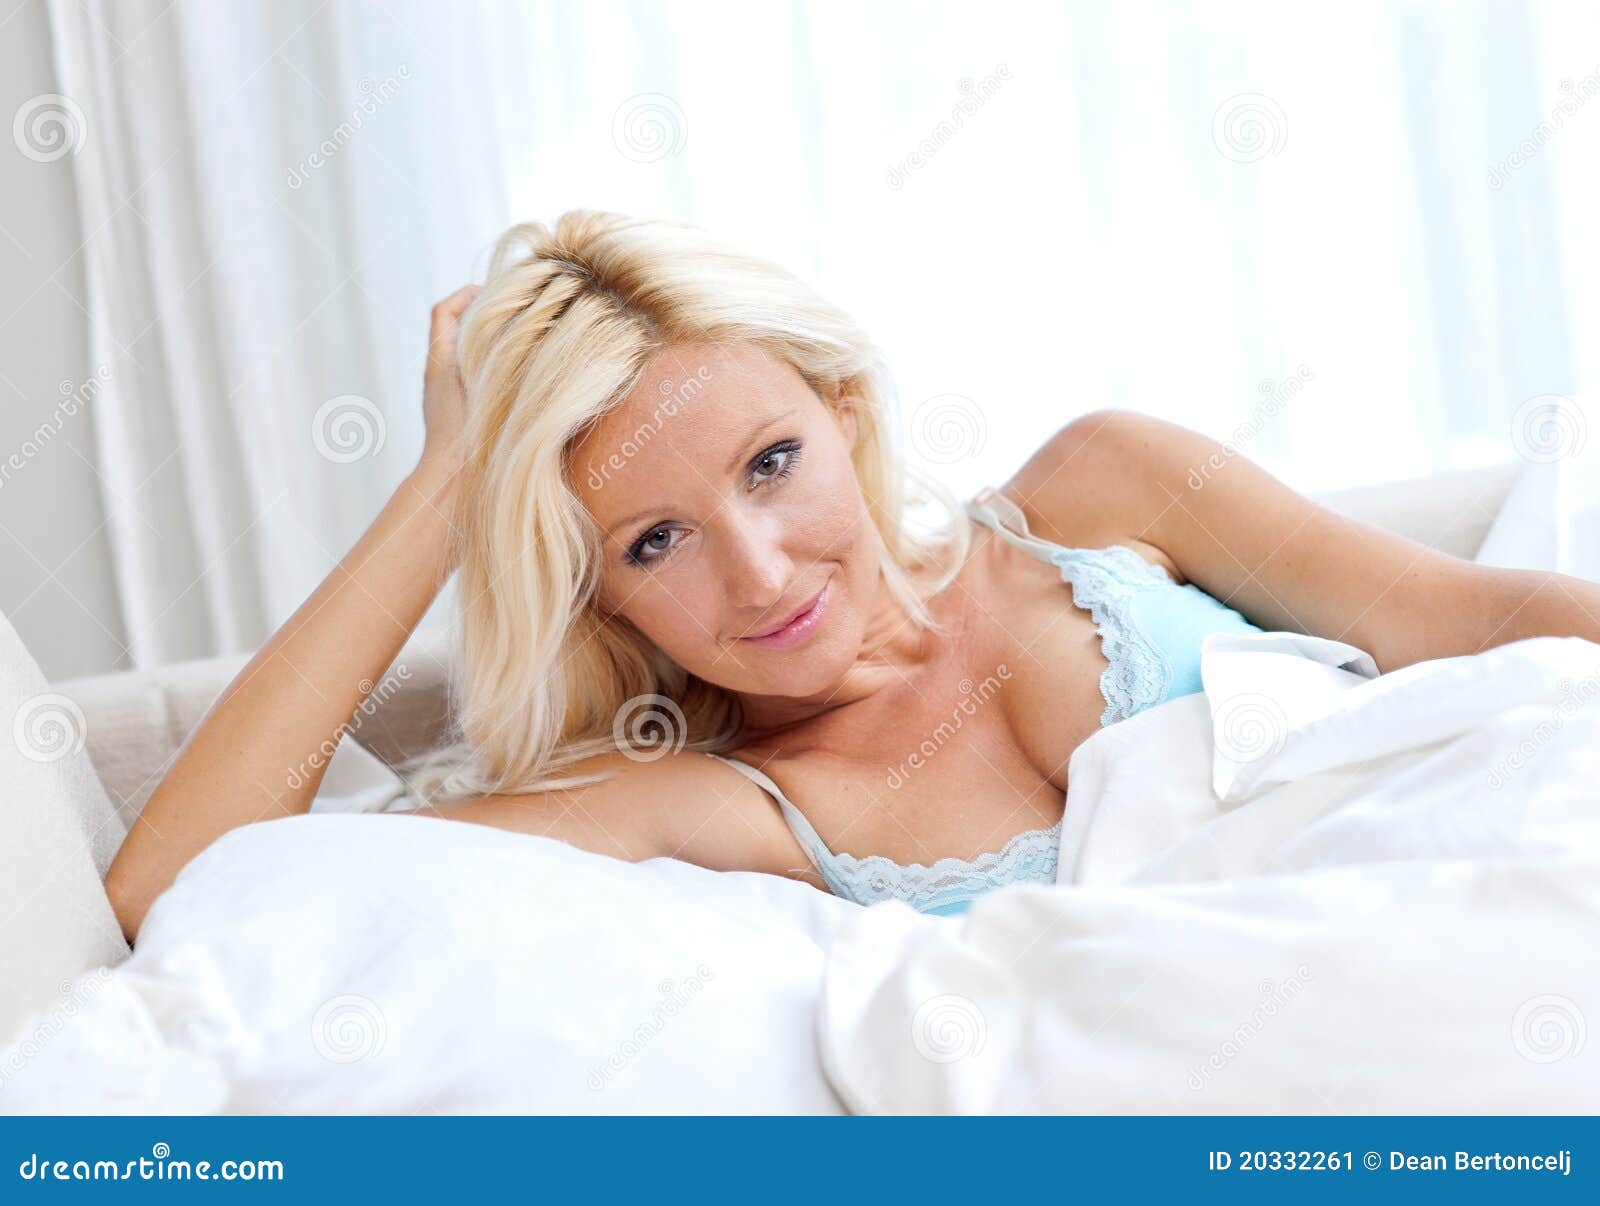 attractive woman in bed